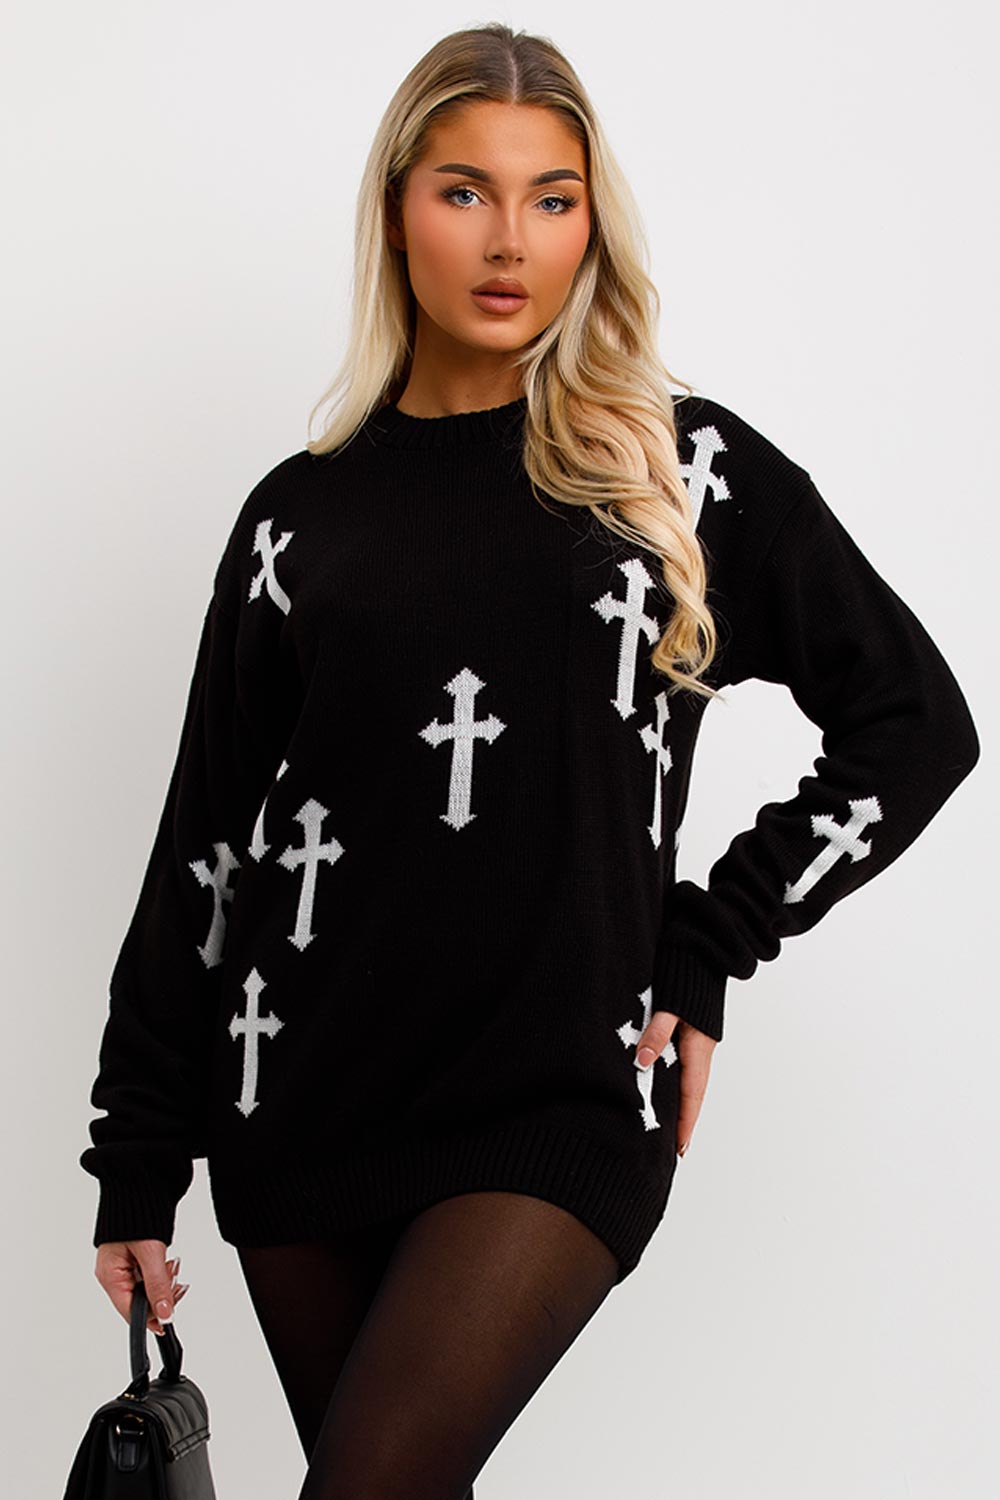 jumper dress with crosses long sleeve knitted winter going out outfit